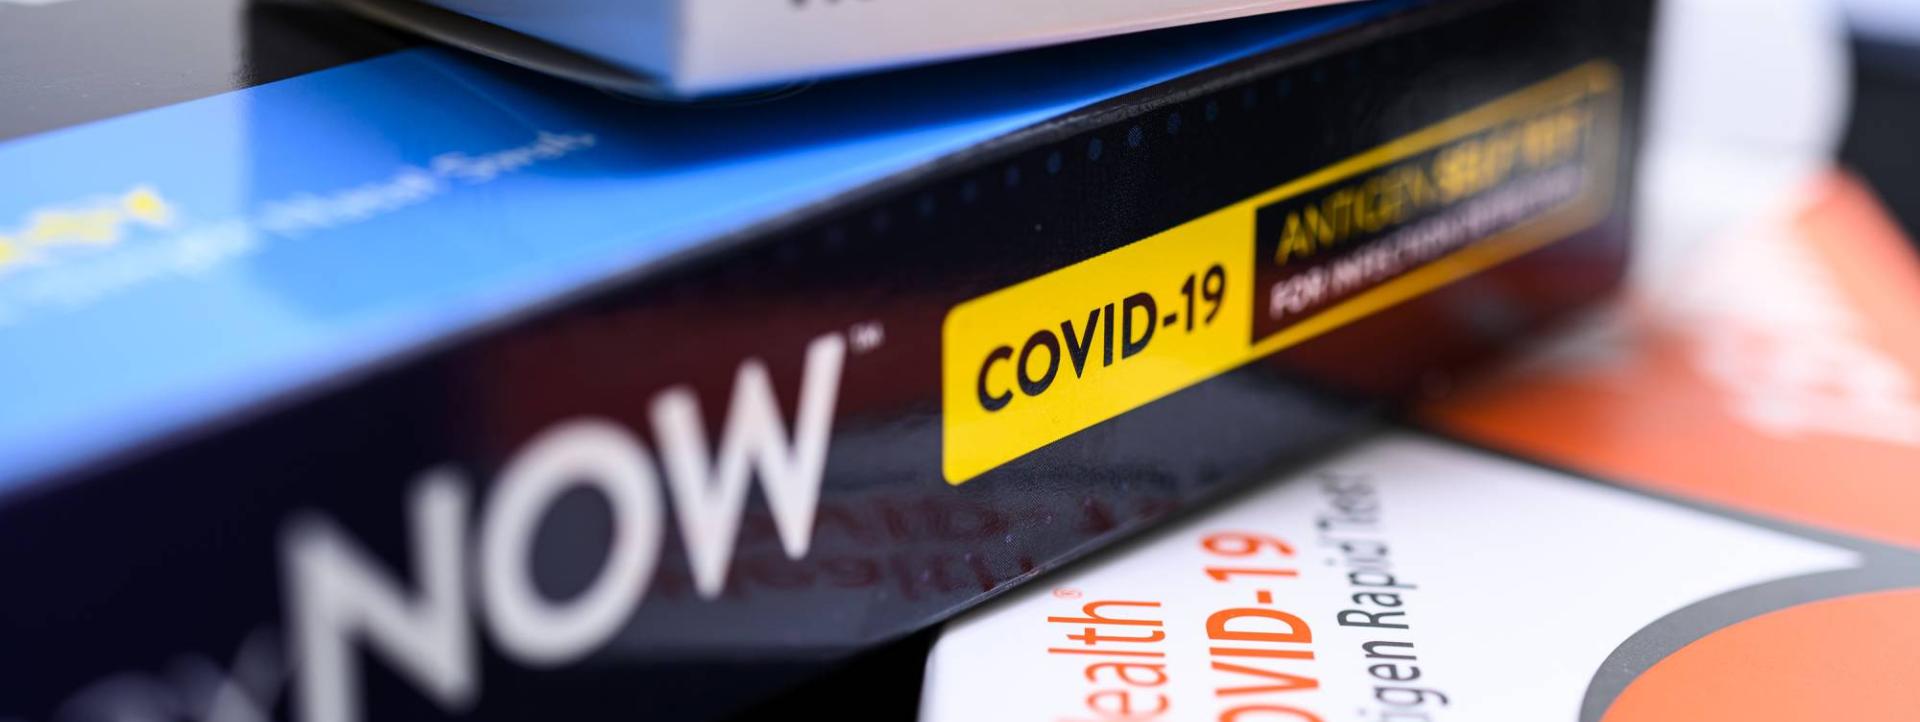 Covid test kits in a stack